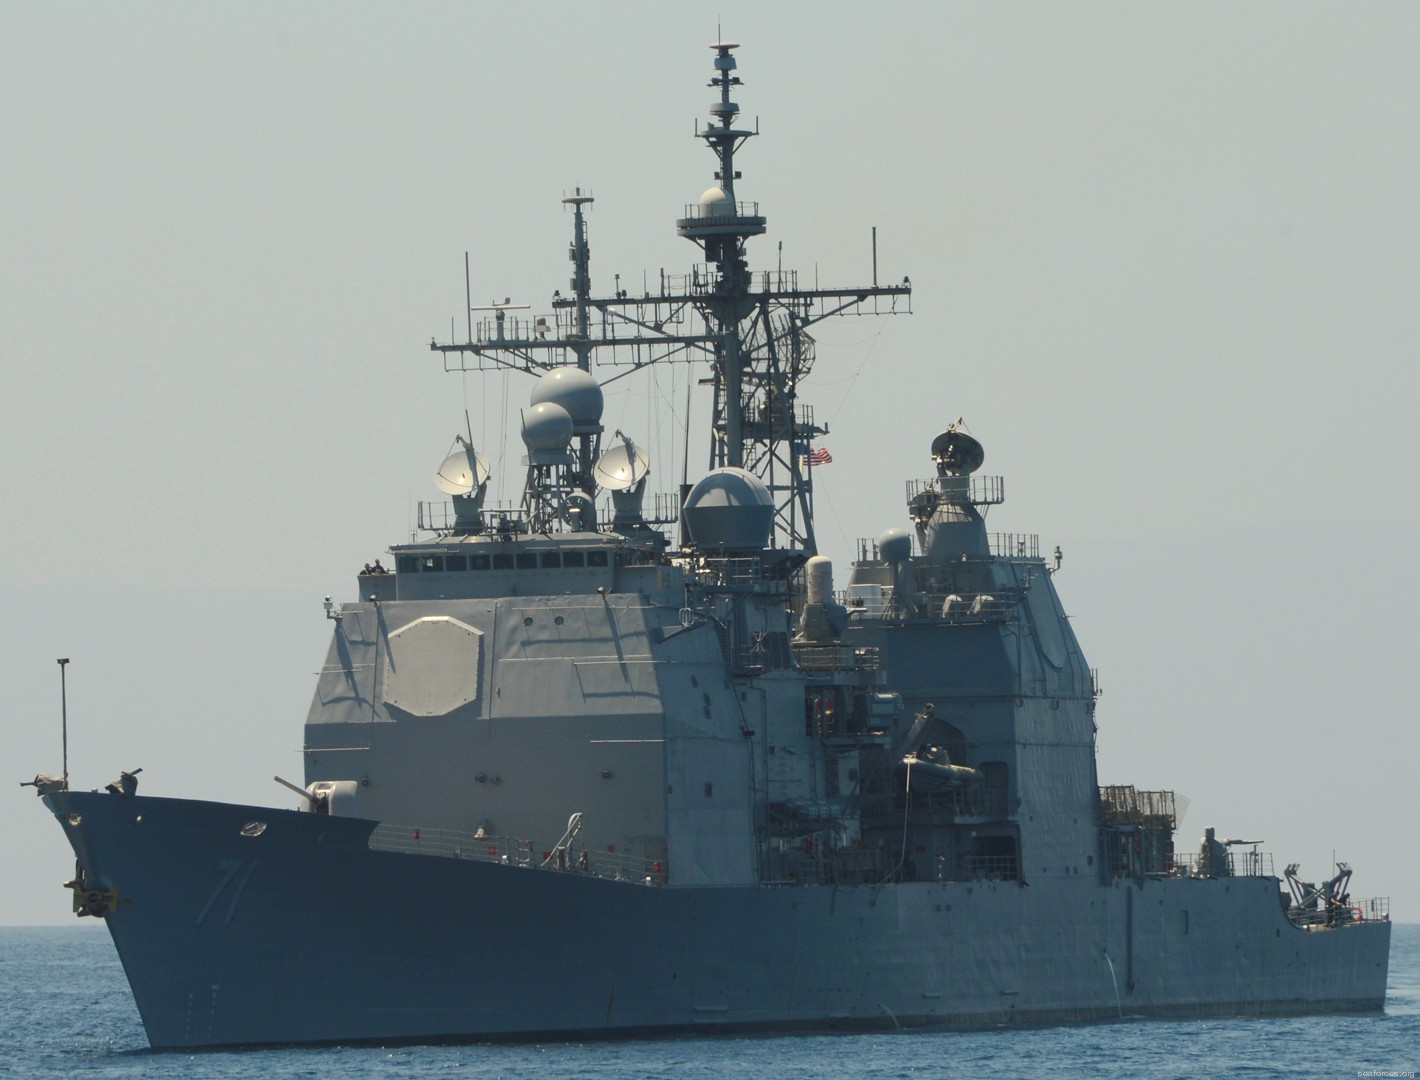 cg-71 uss cape st. george ticonderoga class guided missile cruiser us navy 07 pacific ocean